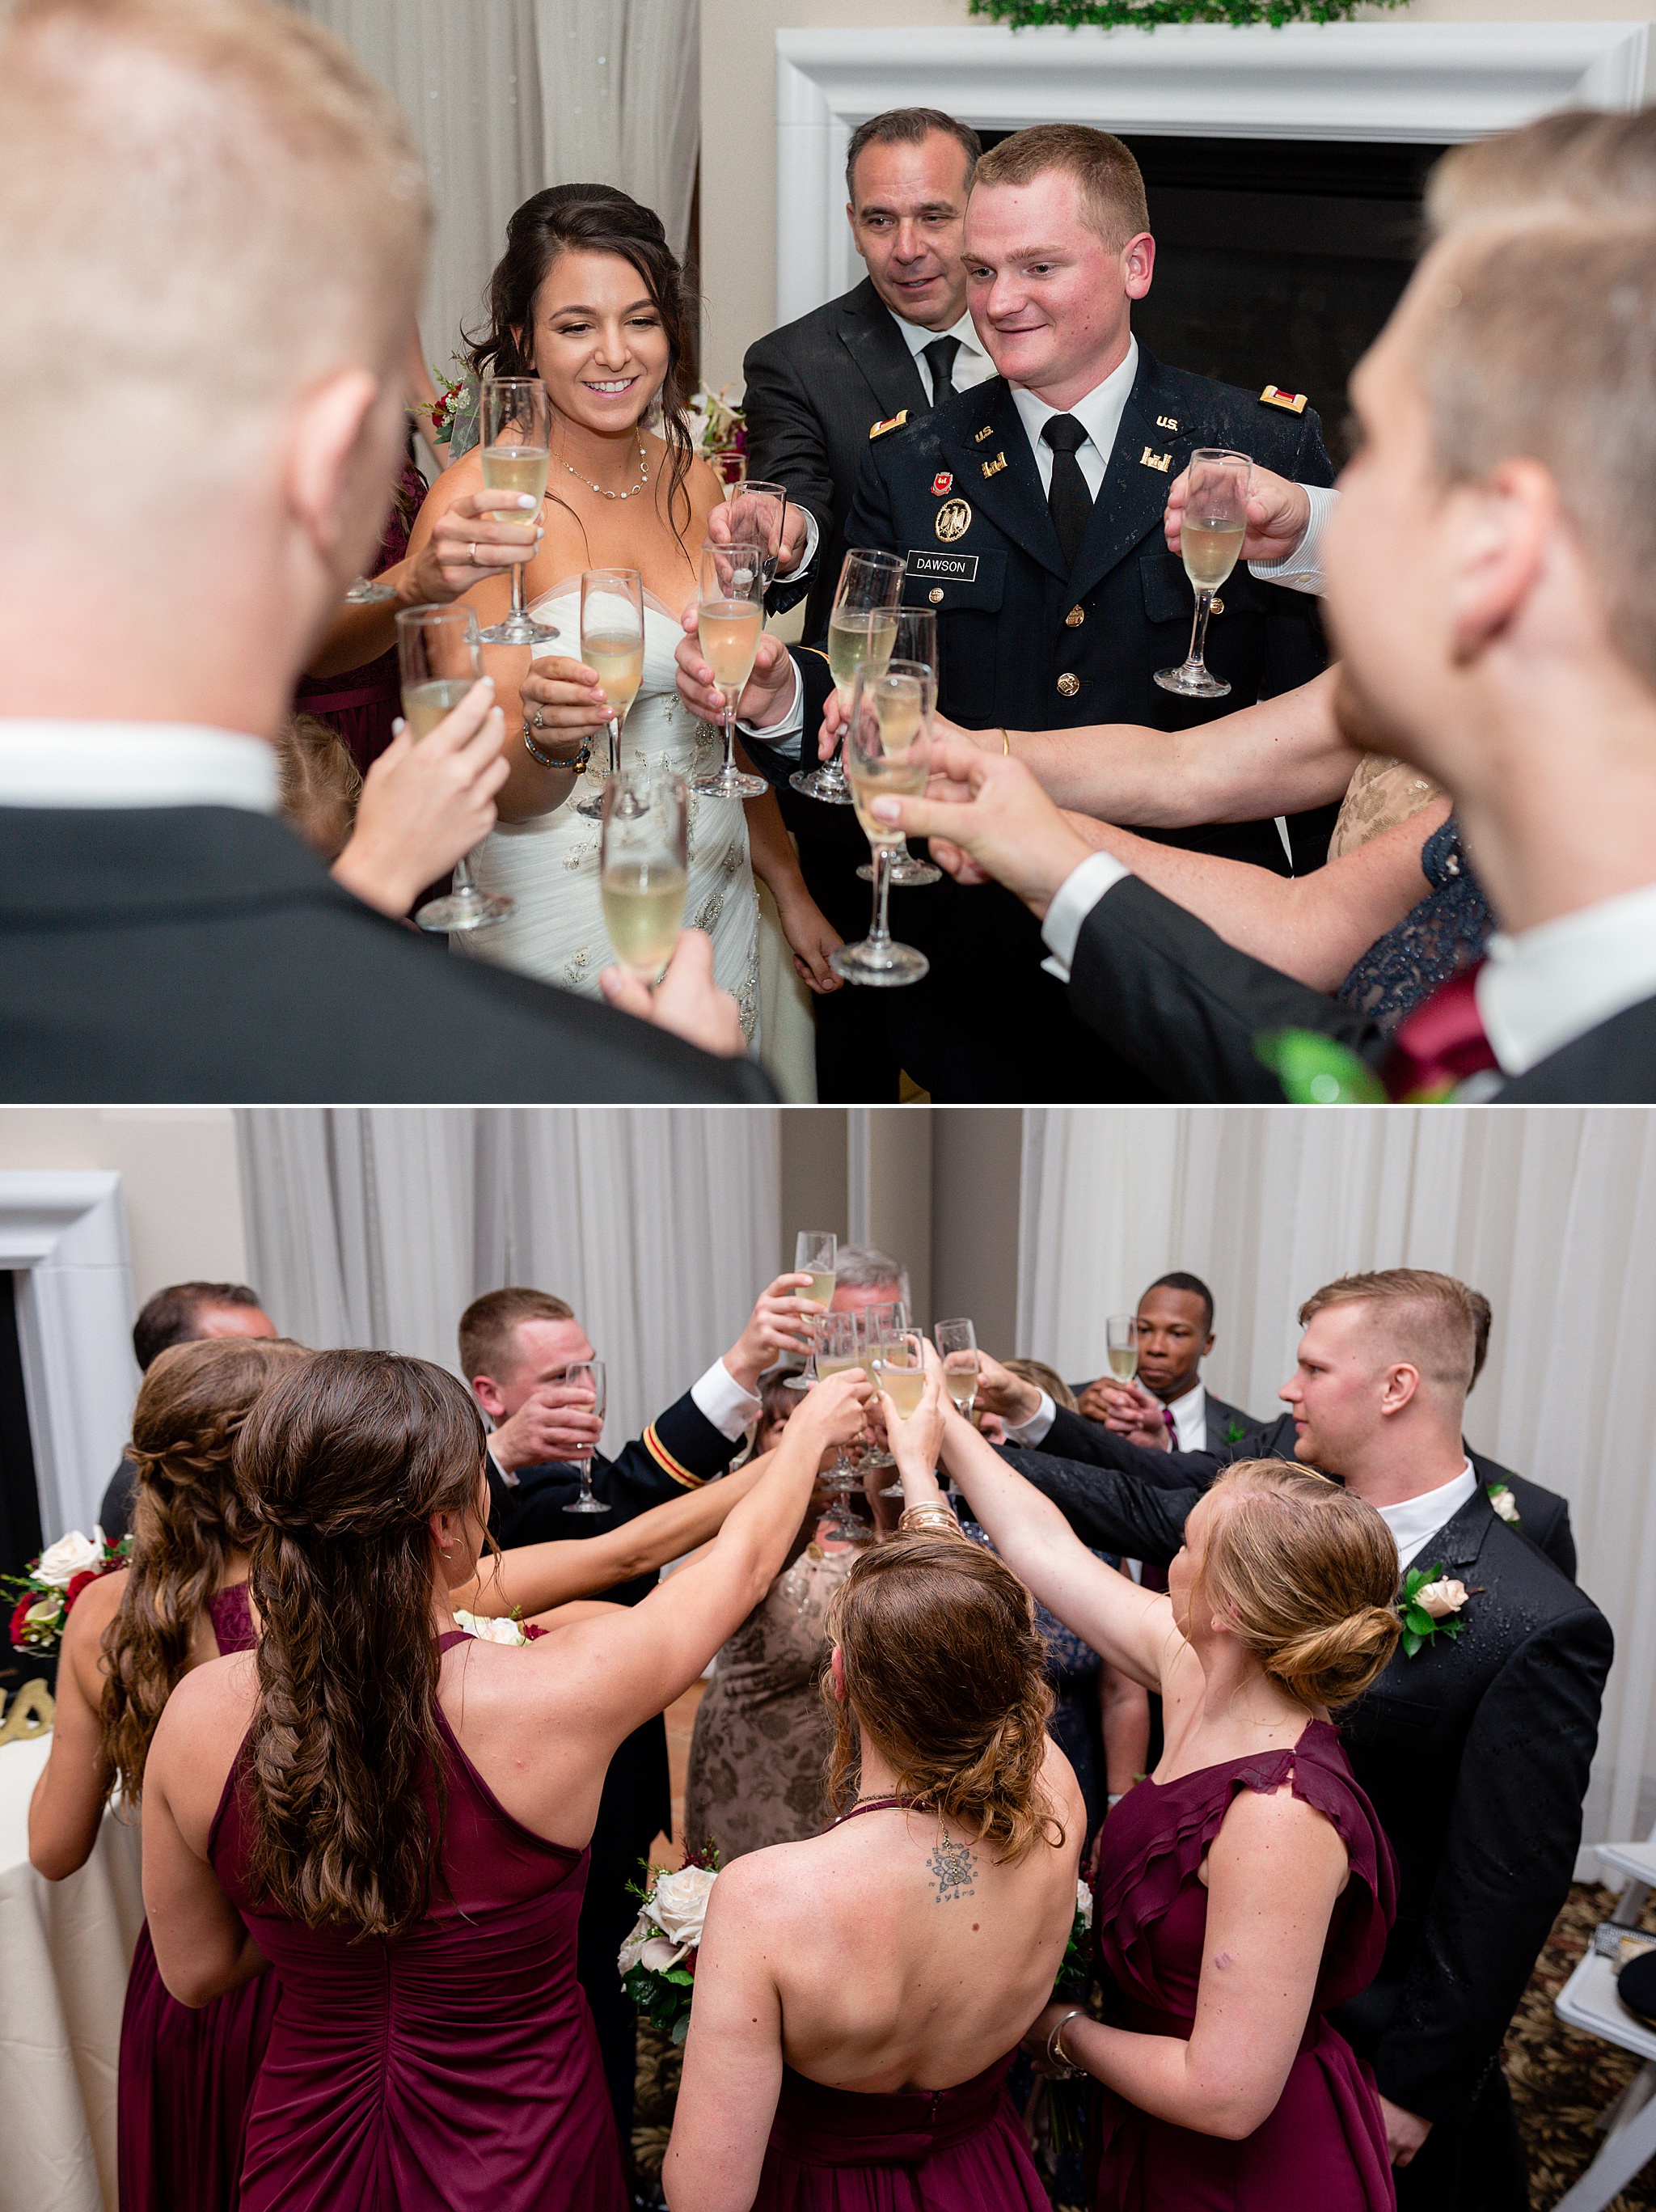 The Bridal Party doing a champagne toast. Tania & Chris' Denver Wedding at the Wedgewood Ken Caryl by Colorado Wedding Photography, Jennifer Garza. Colorado Wedding Photographer, Colorado Wedding Photography, Denver Wedding Photographer, Denver Wedding Photography, US Marine Corp Wedding, US Marine Corp, Military Wedding, US Marines, Wedgewood Weddings, Wedgewood Weddings Ken Caryl, Colorado Wedding, Denver Wedding, Wedding Photographer, Colorado Bride, Brides of Colorado